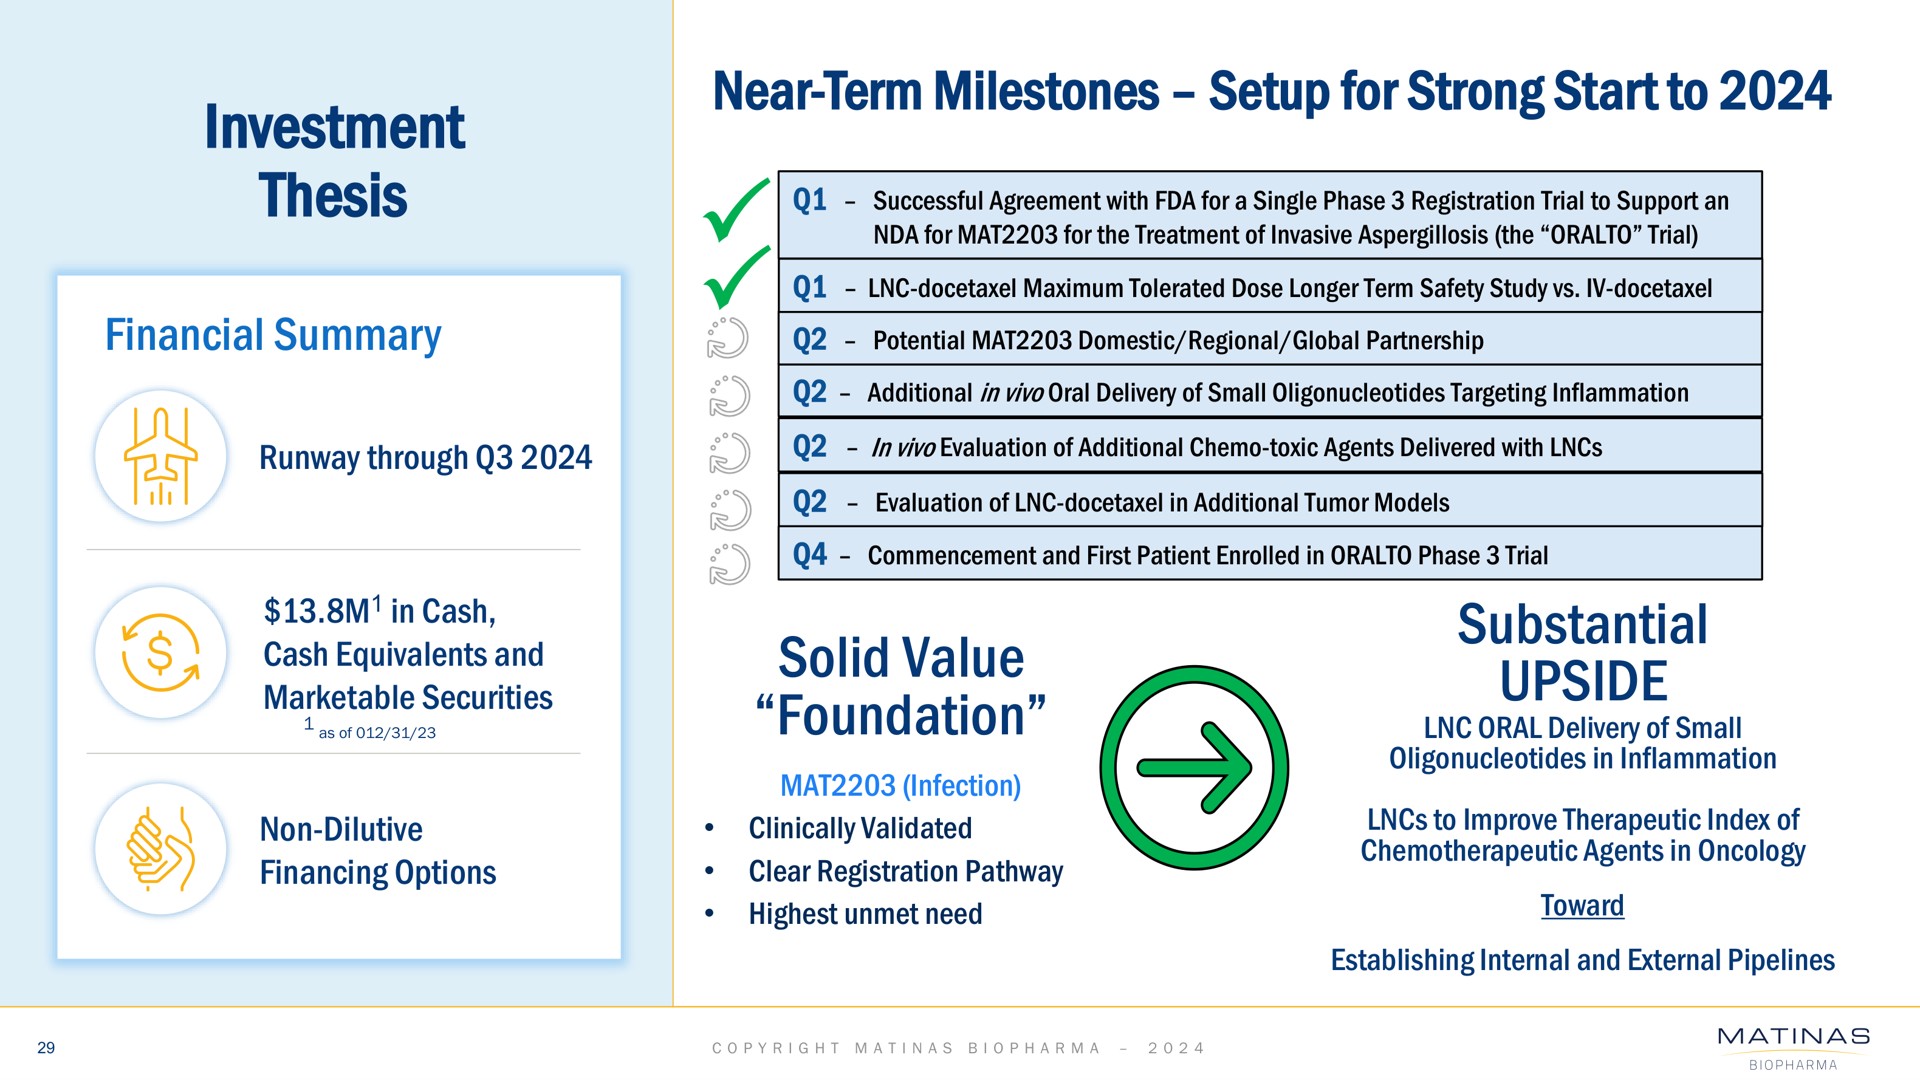 investment thesis financial summary near term milestones setup for strong start to solid value foundation substantial upside oral delivery of small | Matinas BioPharma